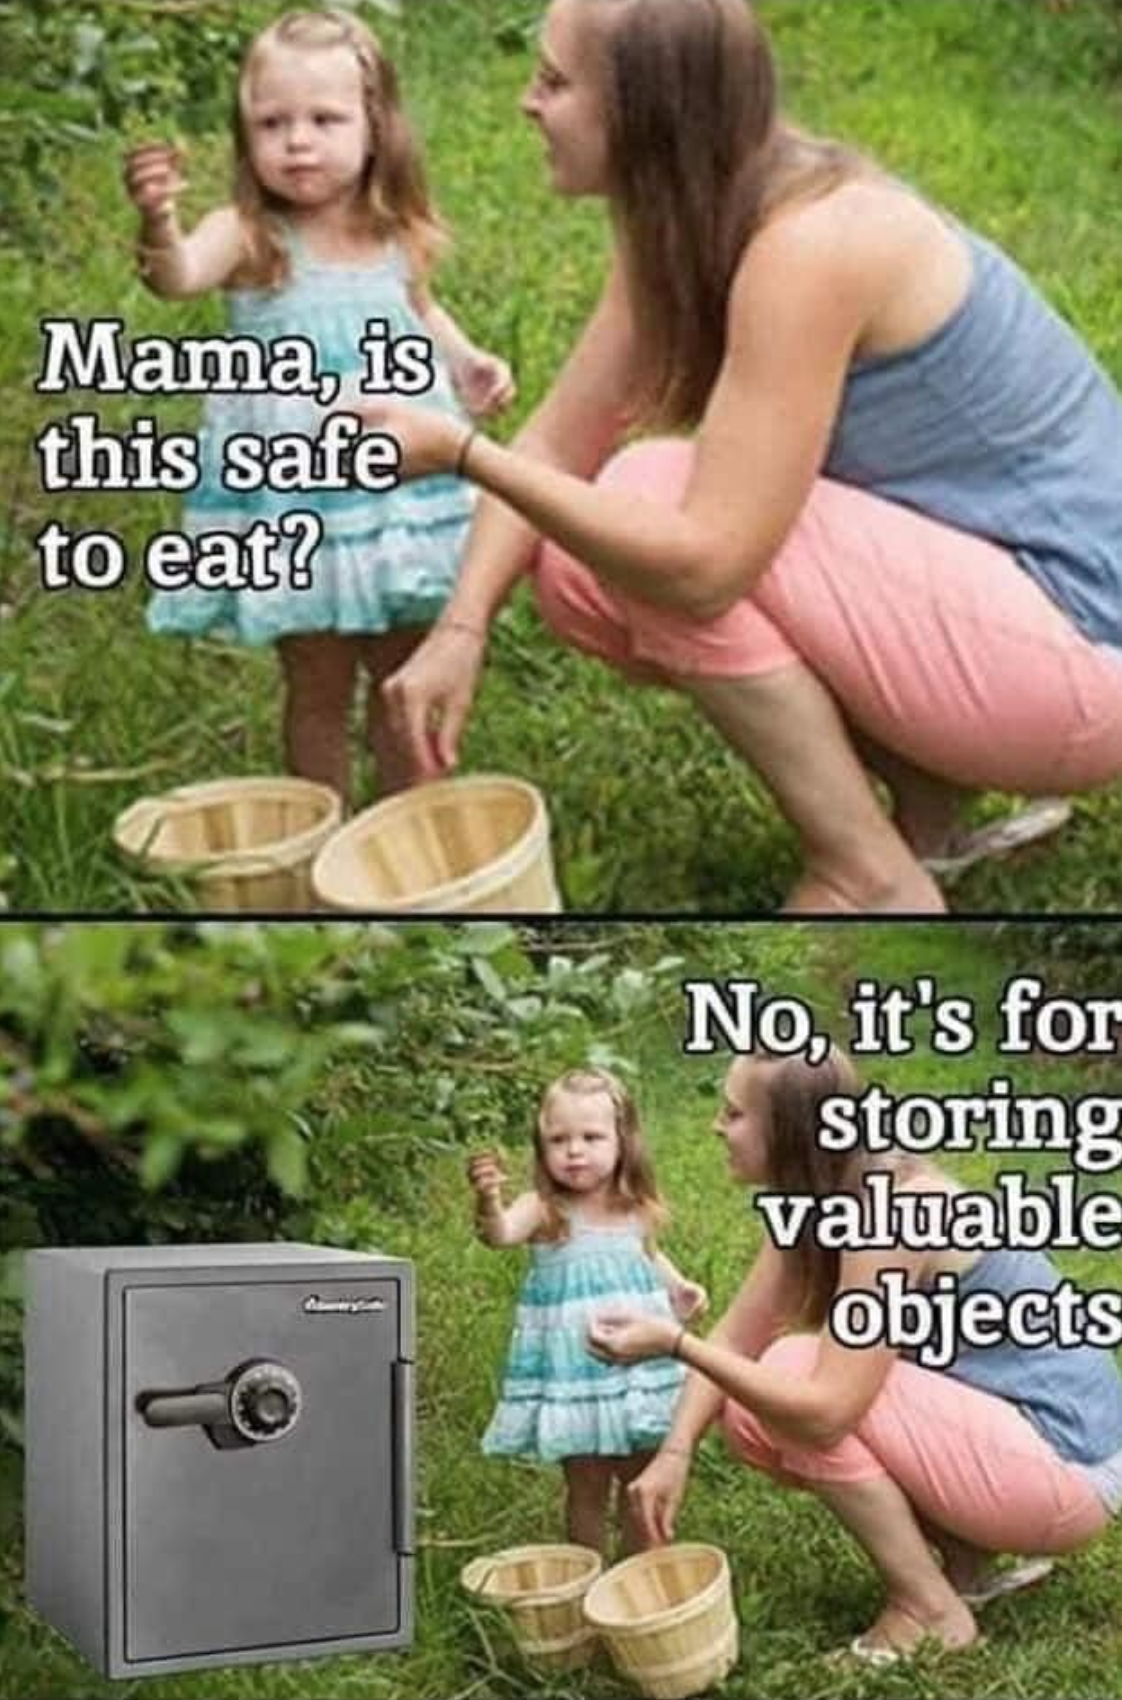 safe to eat meme - Mama, is this safe to eat? No, it's for storing valuable objects